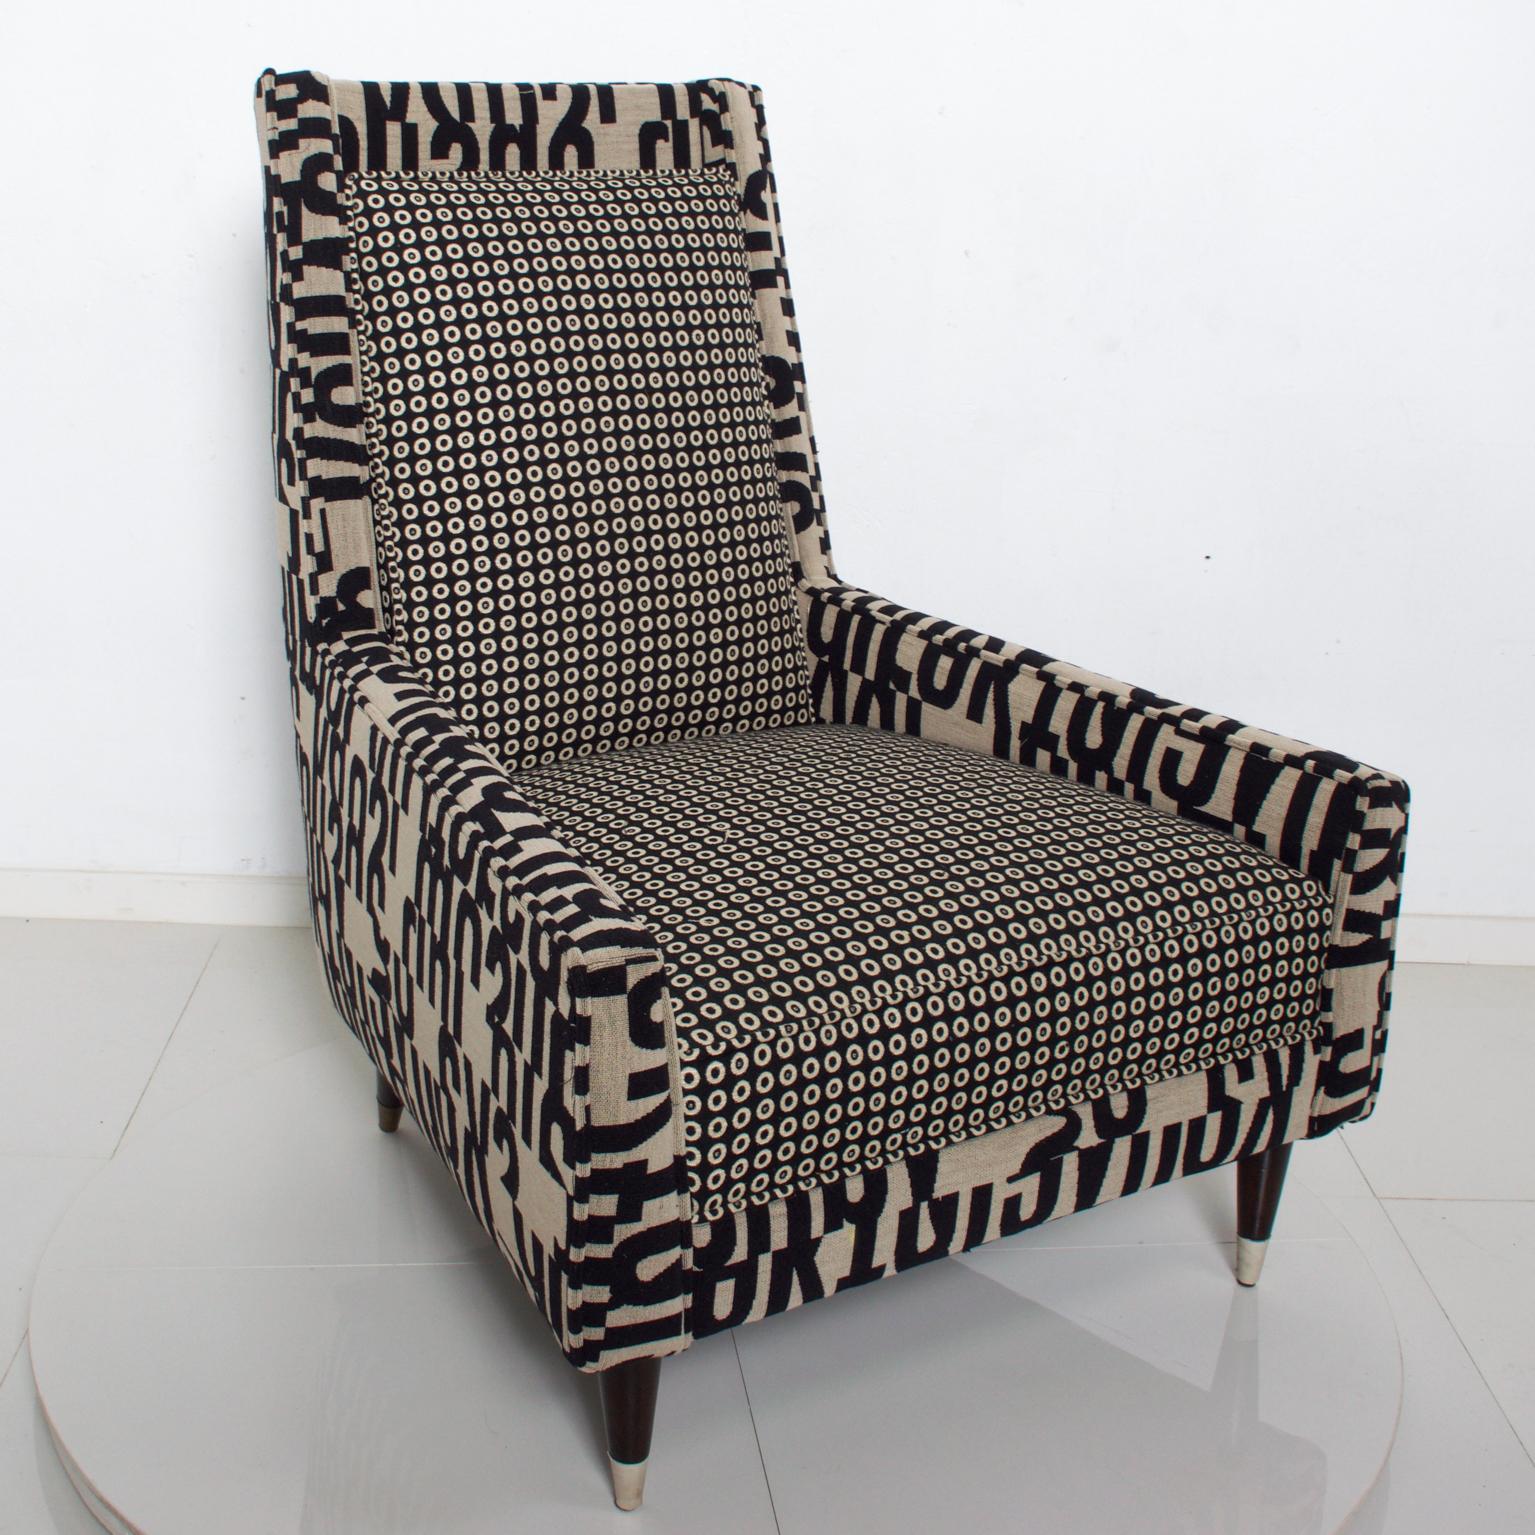 For your Consideration: Fabulous Gio Ponti Style Wingback Lounge Chairs with Fancy Gold Trimmed Legs
Dimensions Are: 38